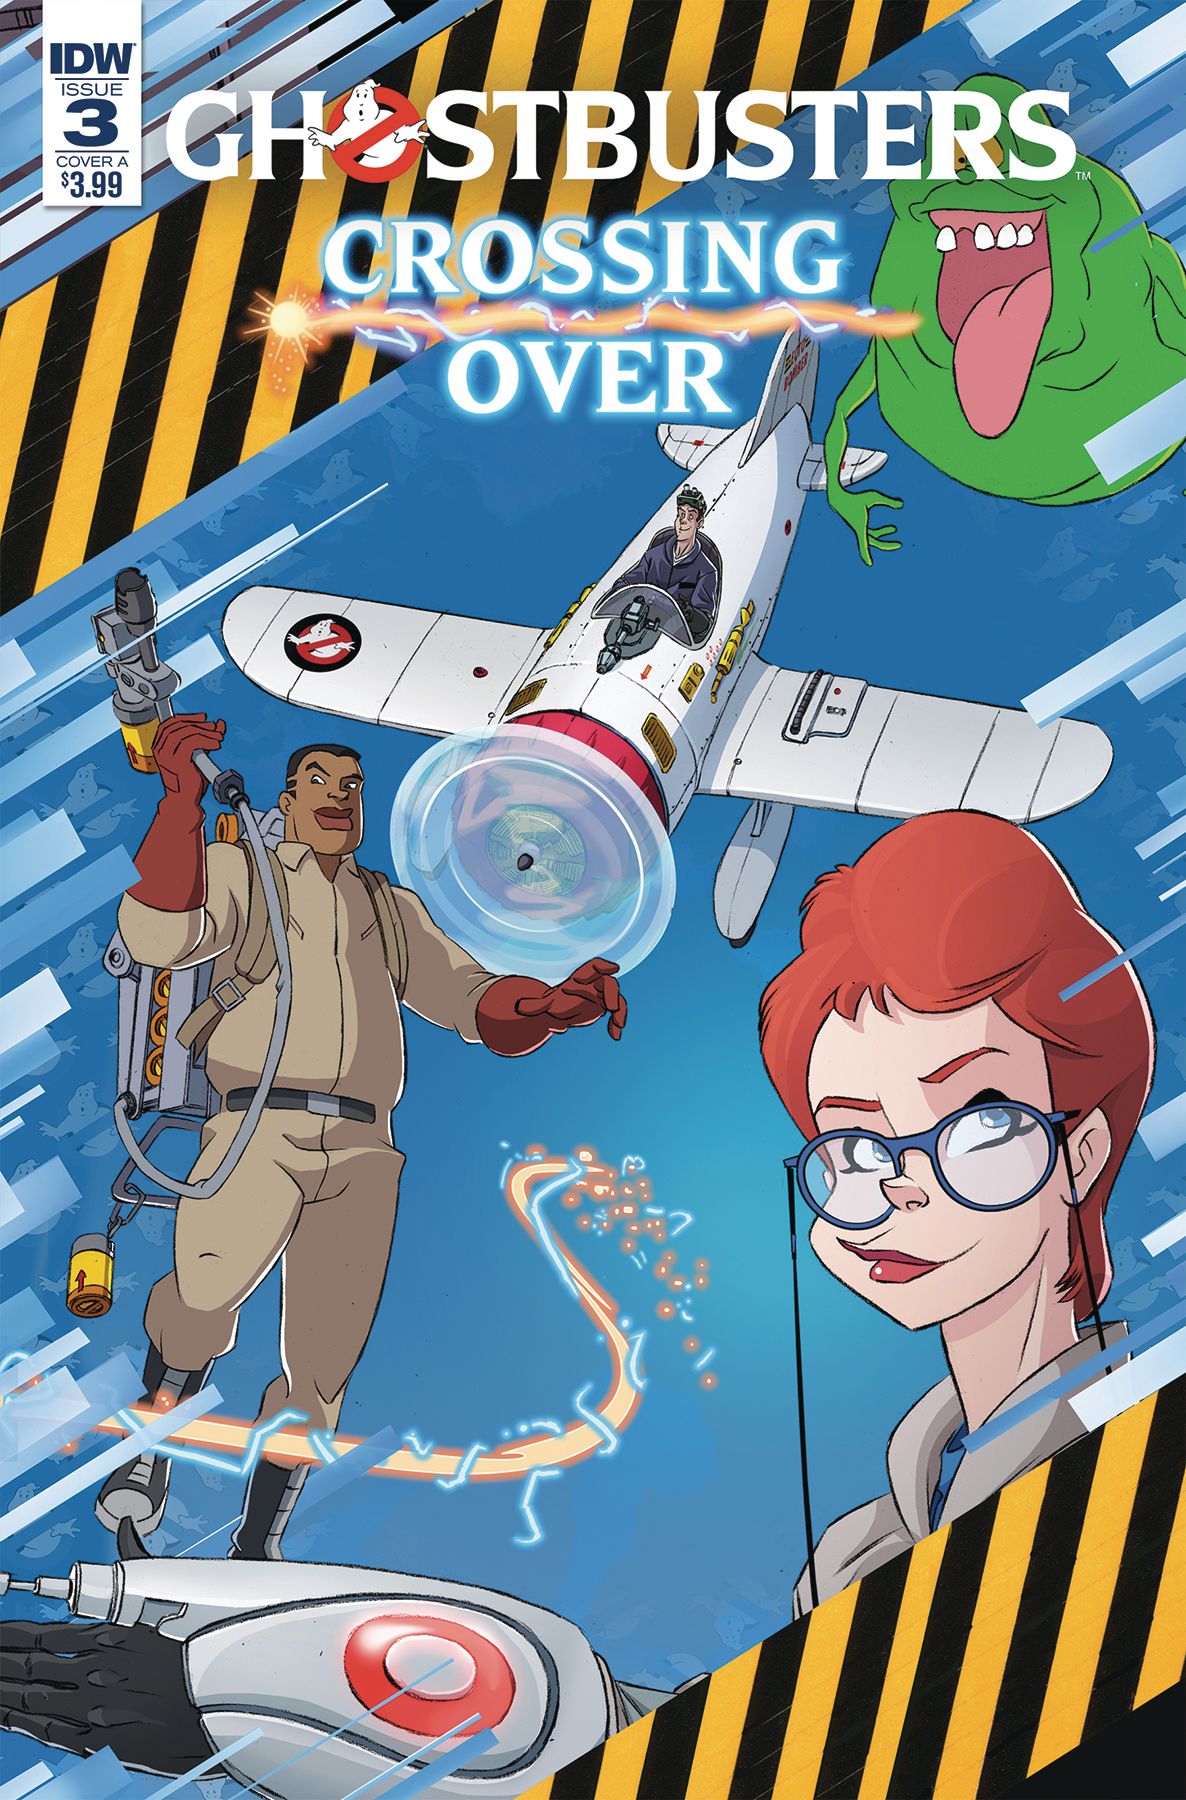 Ghostbusters: Crossing Over #3 Comic